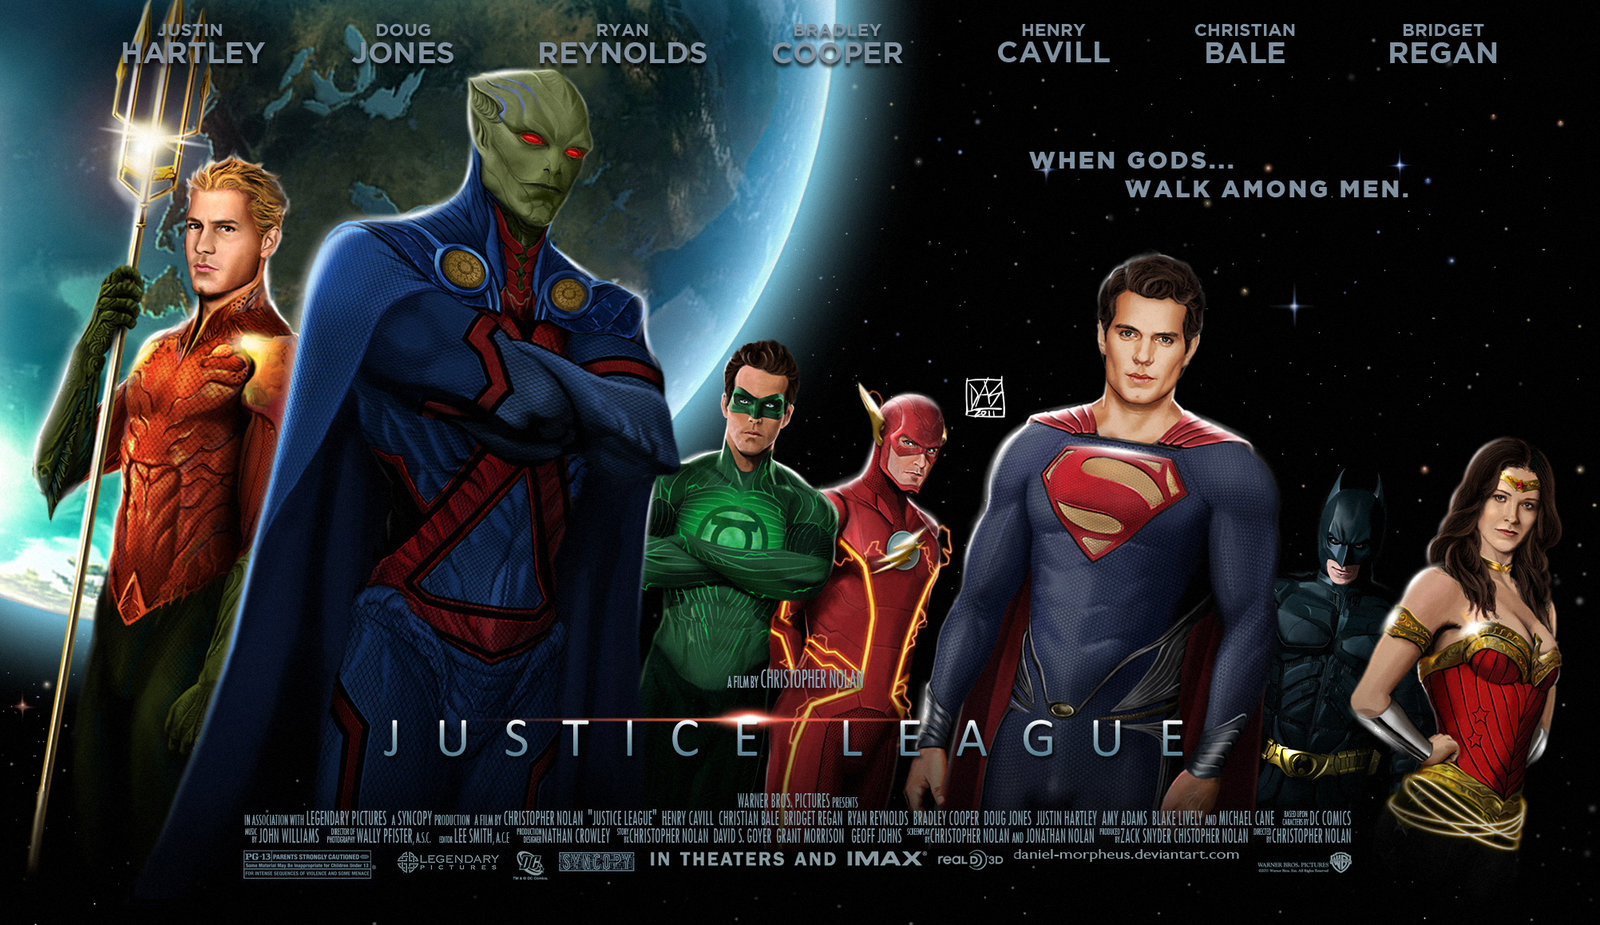 Justice League Movie Poster by daniel morpheus on